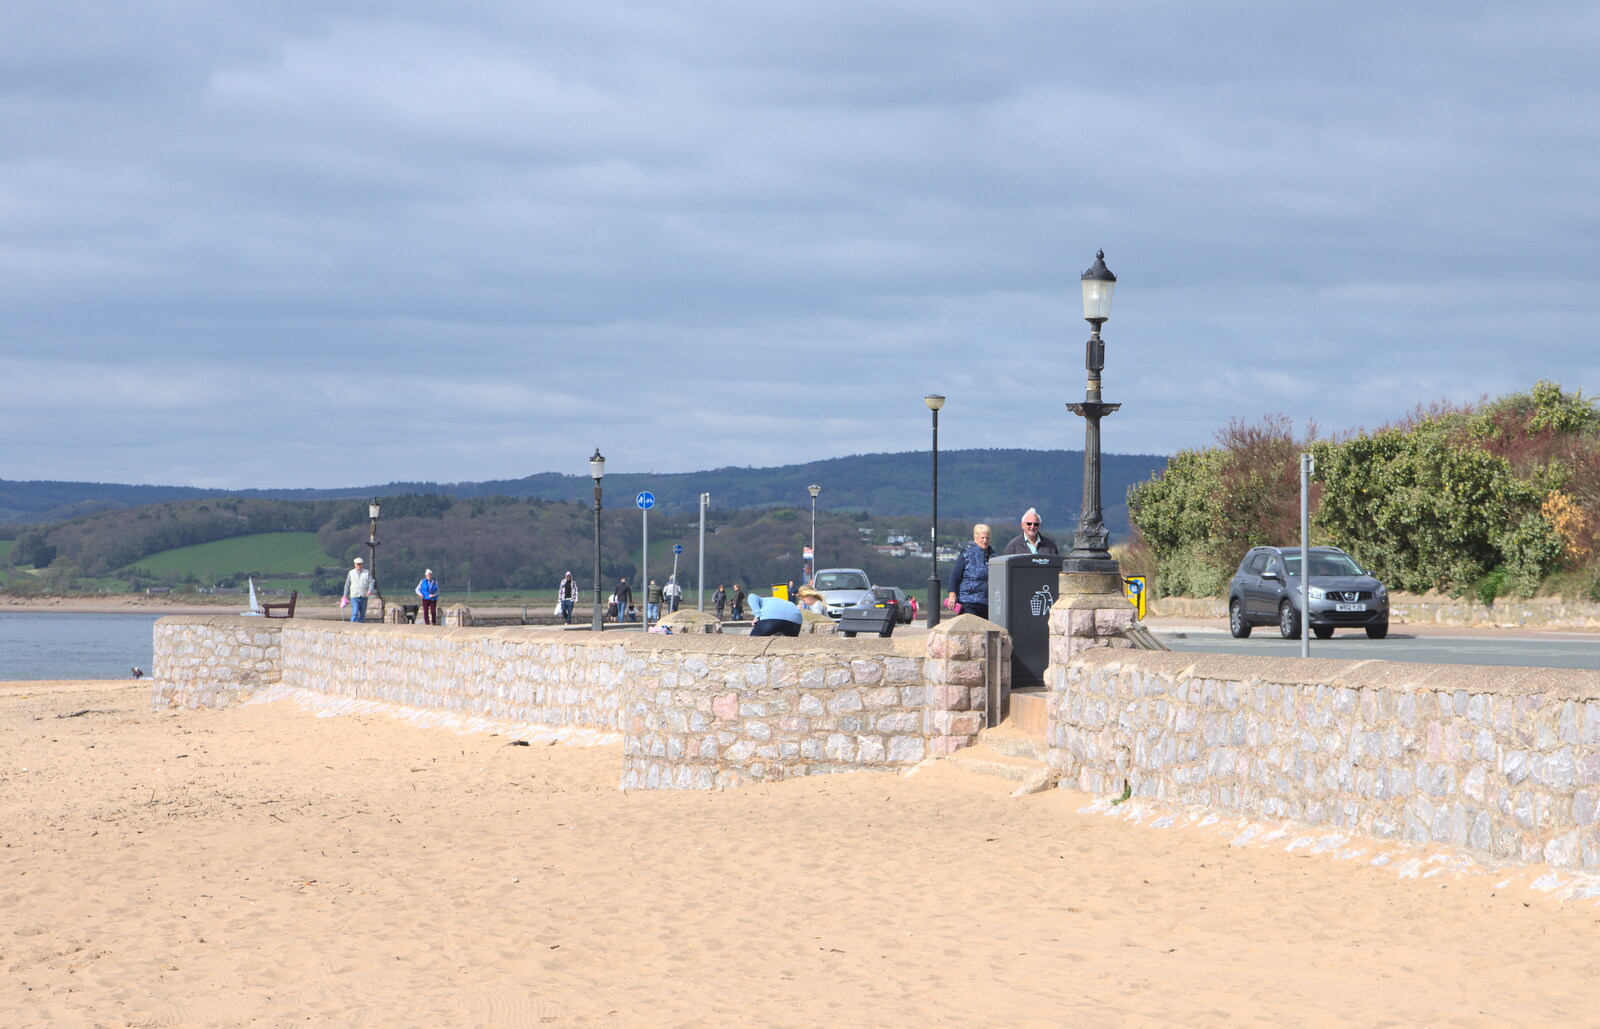 The seafront at Exmouth from Grandma J's and a Day on the Beach, Spreyton and Exmouth, Devon - 13th April 2017